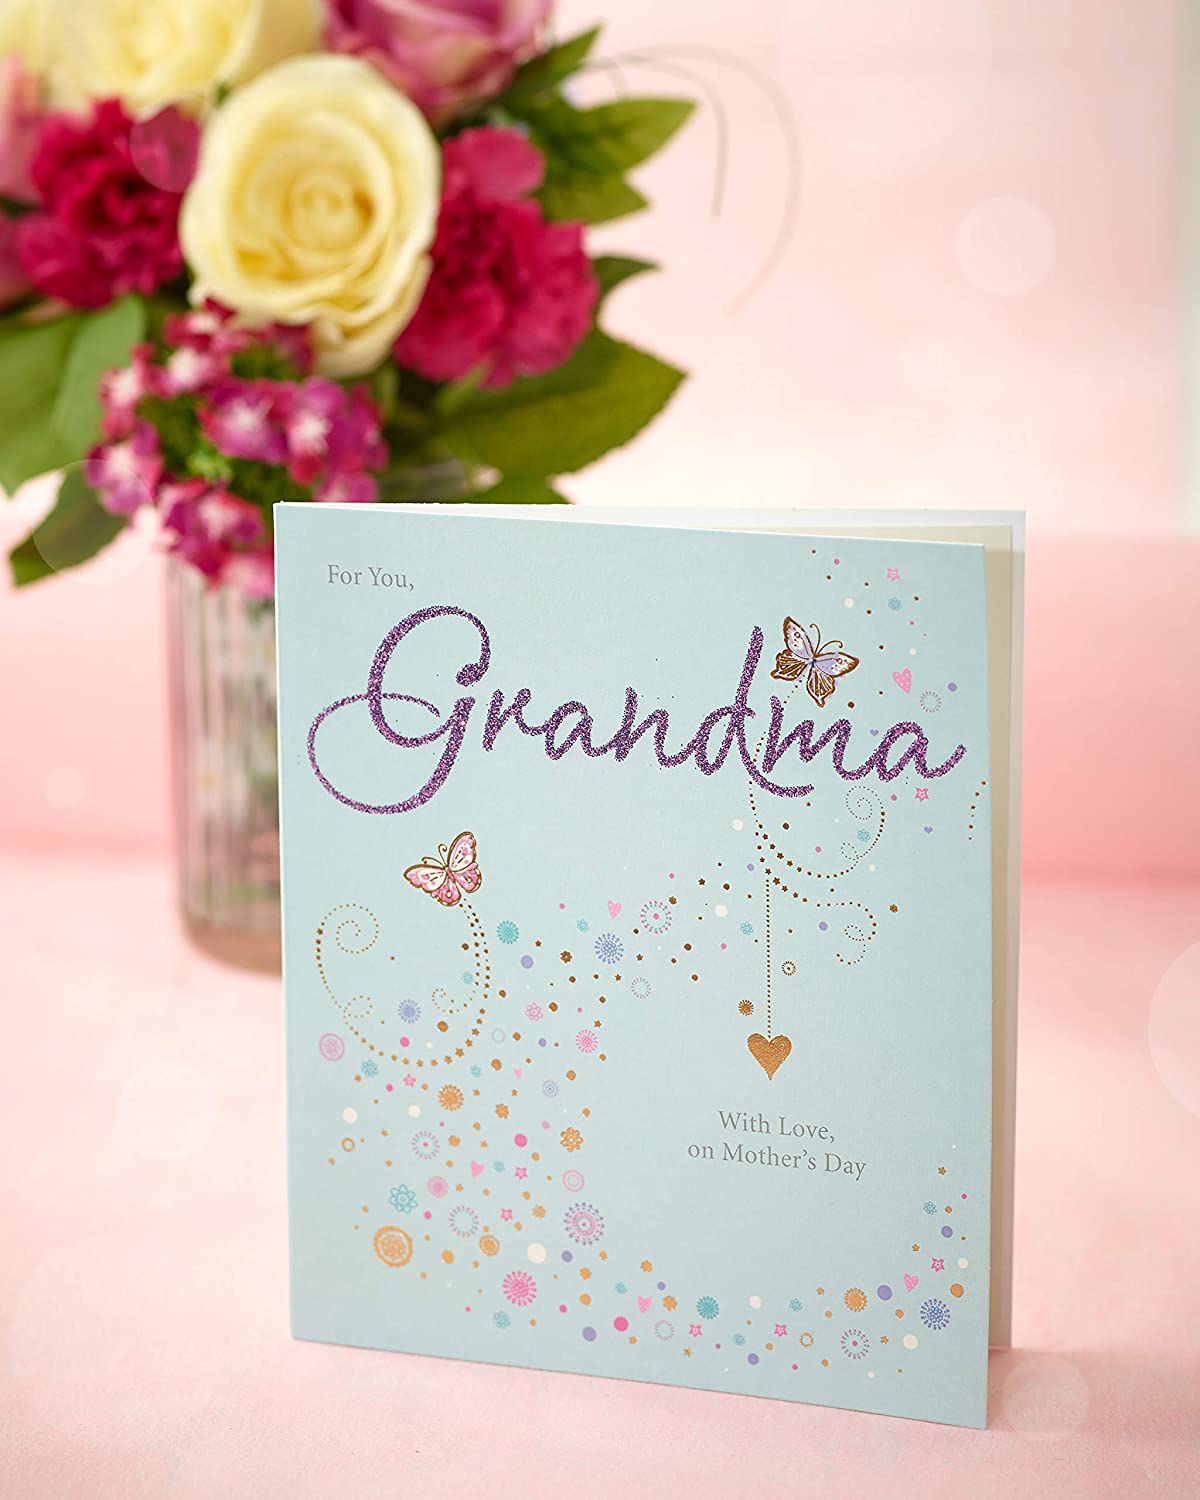 For Grandma Lovely Floral Design Mother's Day Card From Grandchild